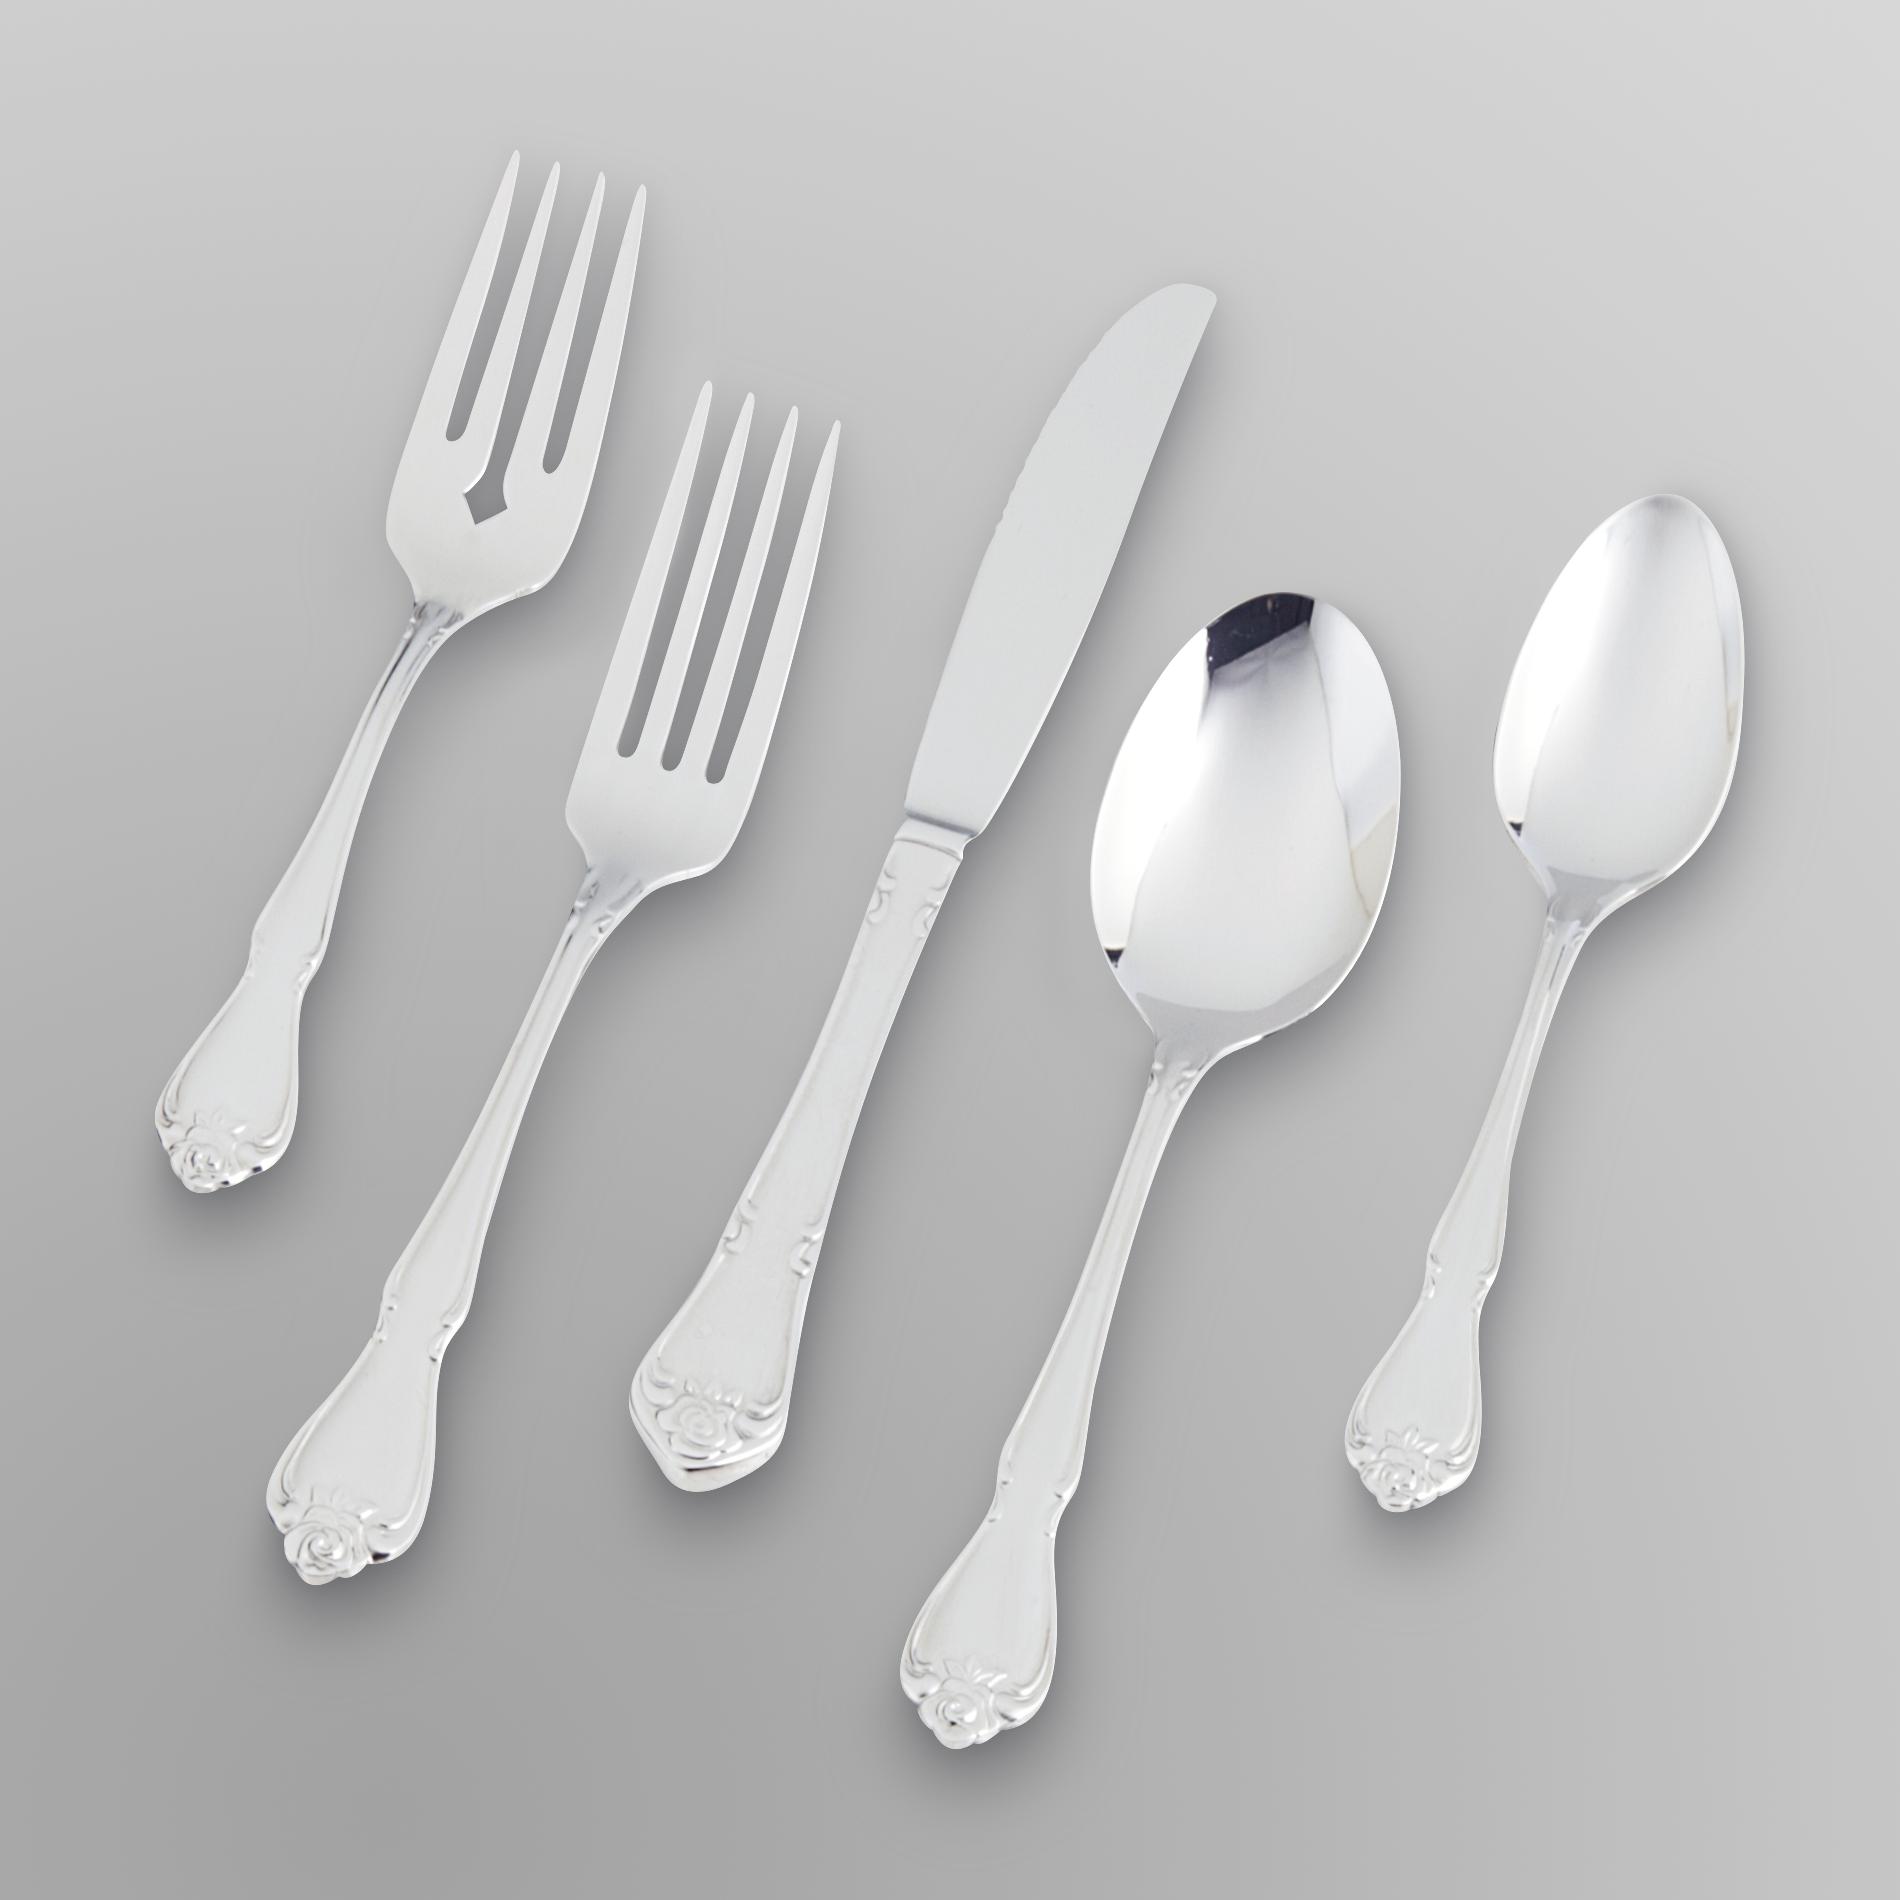 Ragalta 16 Piece Stainless Steel Flatware Set with Colored Handles ...